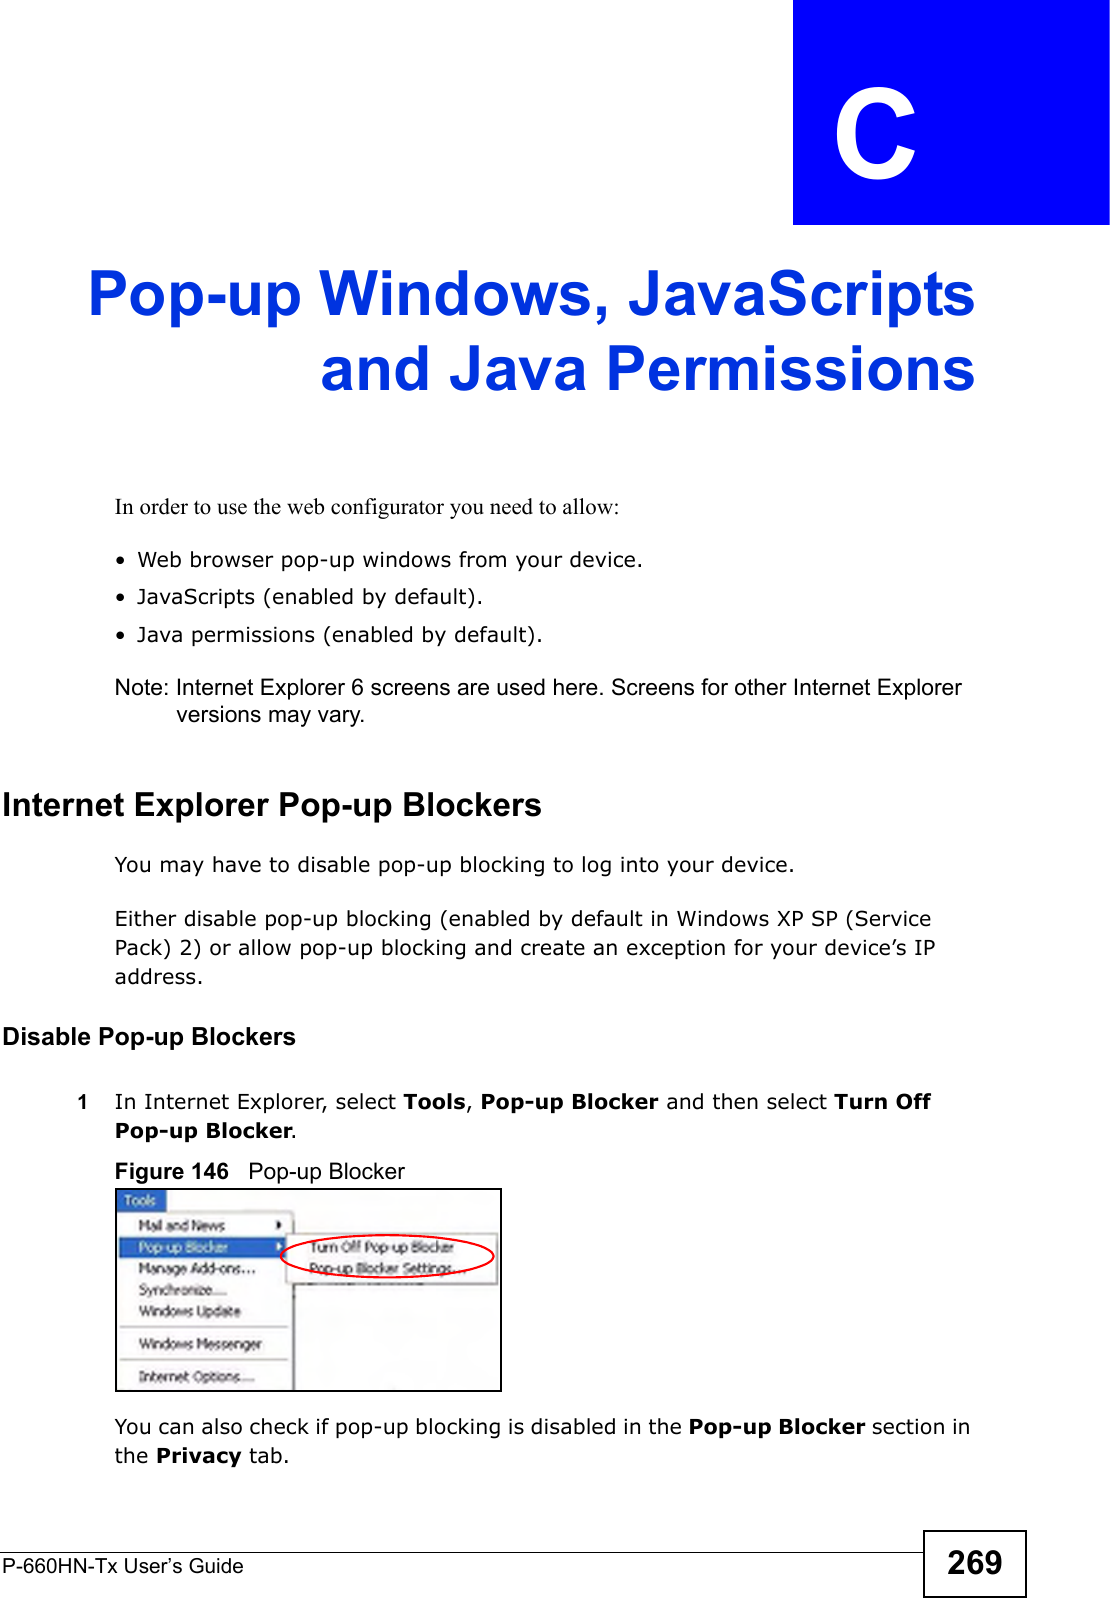 P-660HN-Tx User’s Guide 269APPENDIX  C Pop-up Windows, JavaScriptsand Java PermissionsIn order to use the web configurator you need to allow:• Web browser pop-up windows from your device.• JavaScripts (enabled by default).• Java permissions (enabled by default).Note: Internet Explorer 6 screens are used here. Screens for other Internet Explorer versions may vary.Internet Explorer Pop-up BlockersYou may have to disable pop-up blocking to log into your device. Either disable pop-up blocking (enabled by default in Windows XP SP (Service Pack) 2) or allow pop-up blocking and create an exception for your device’s IP address.Disable Pop-up Blockers1In Internet Explorer, select Tools, Pop-up Blocker and then select Turn Off Pop-up Blocker. Figure 146   Pop-up BlockerYou can also check if pop-up blocking is disabled in the Pop-up Blocker section in the Privacy tab. 